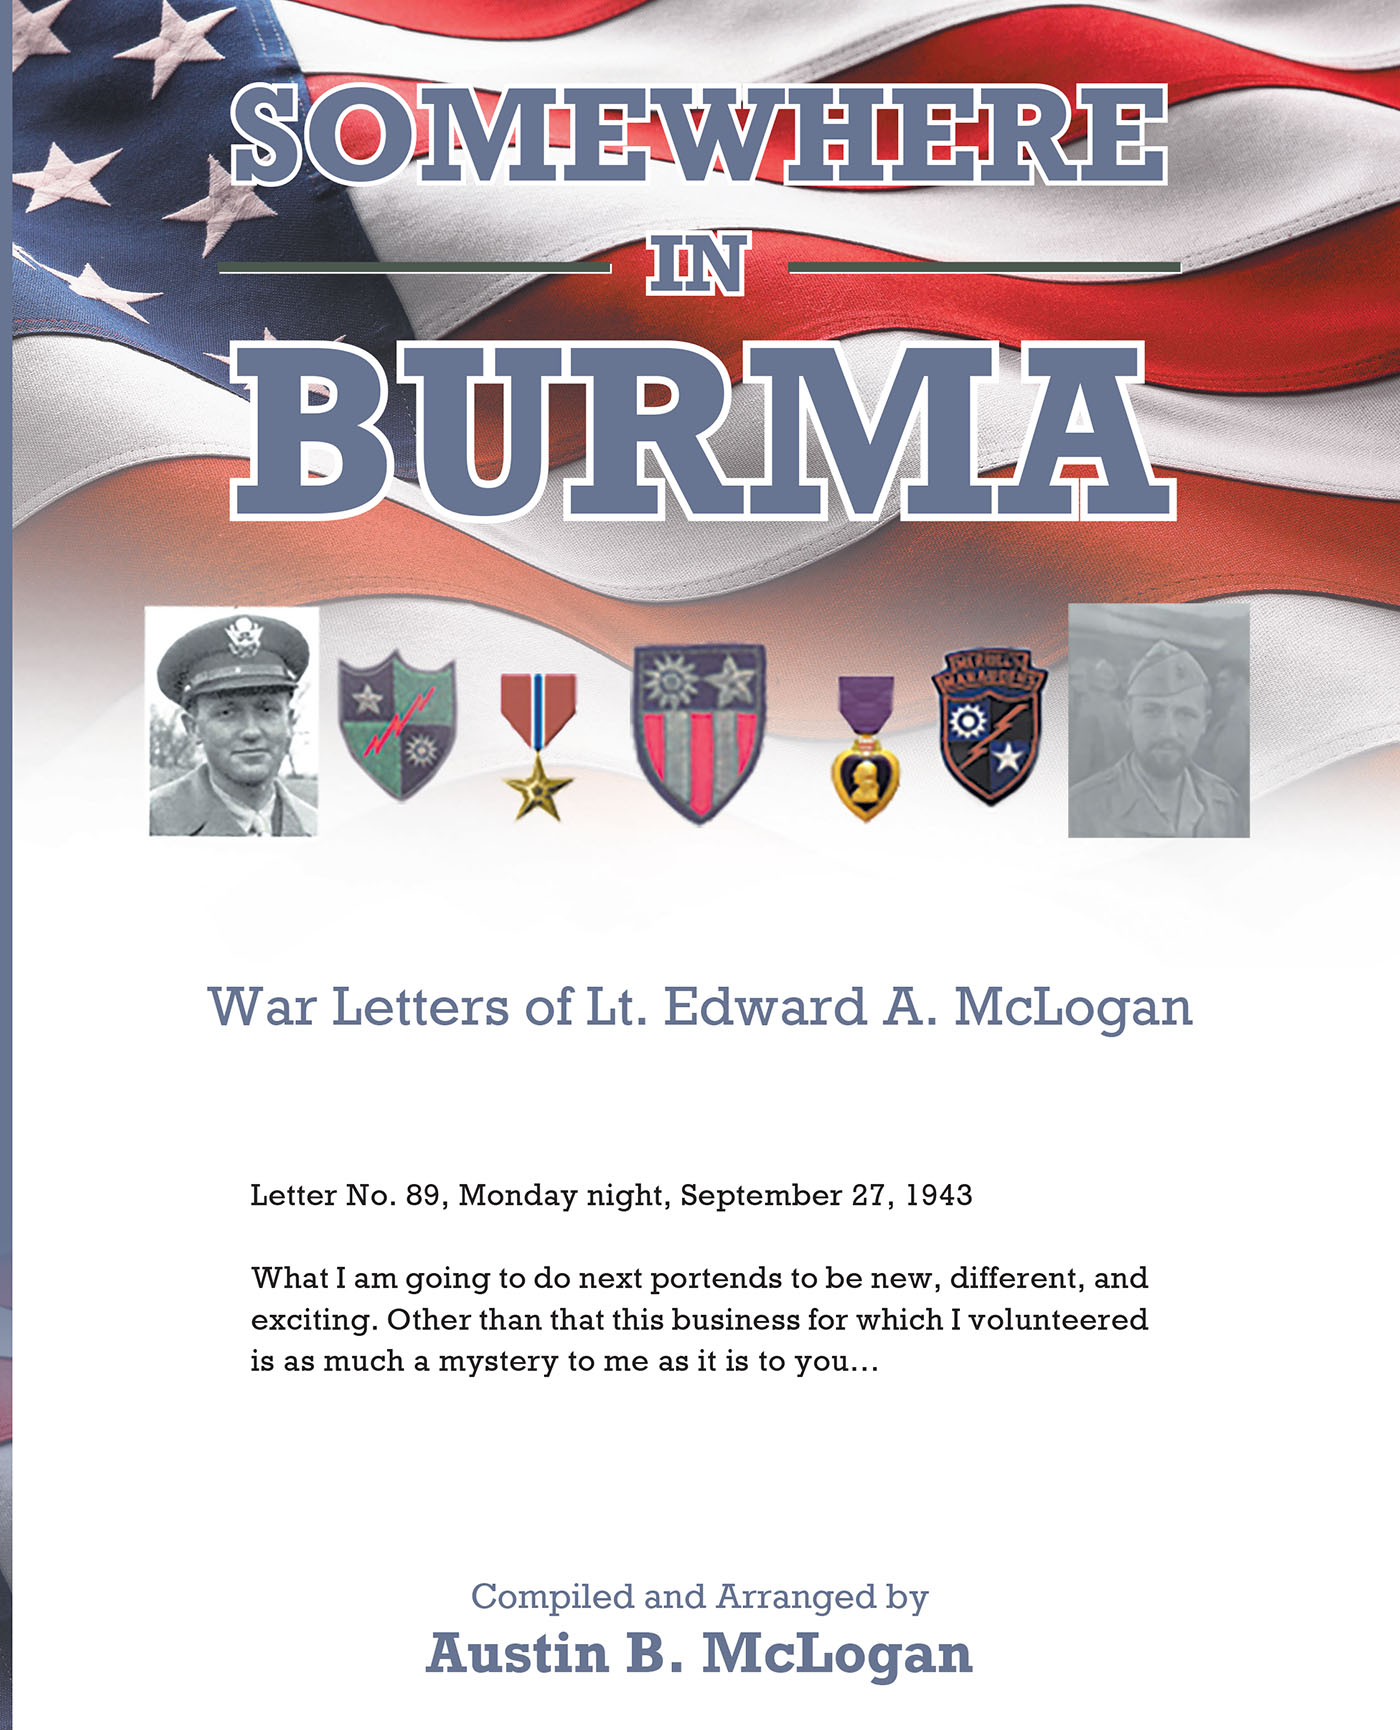 Author Austin B. McLogan’s New Book, "Somewhere in Burma," Holds a Series of Letters from the Author’s Uncle on the Frontlines of the Southeast Asian Theater of WWII